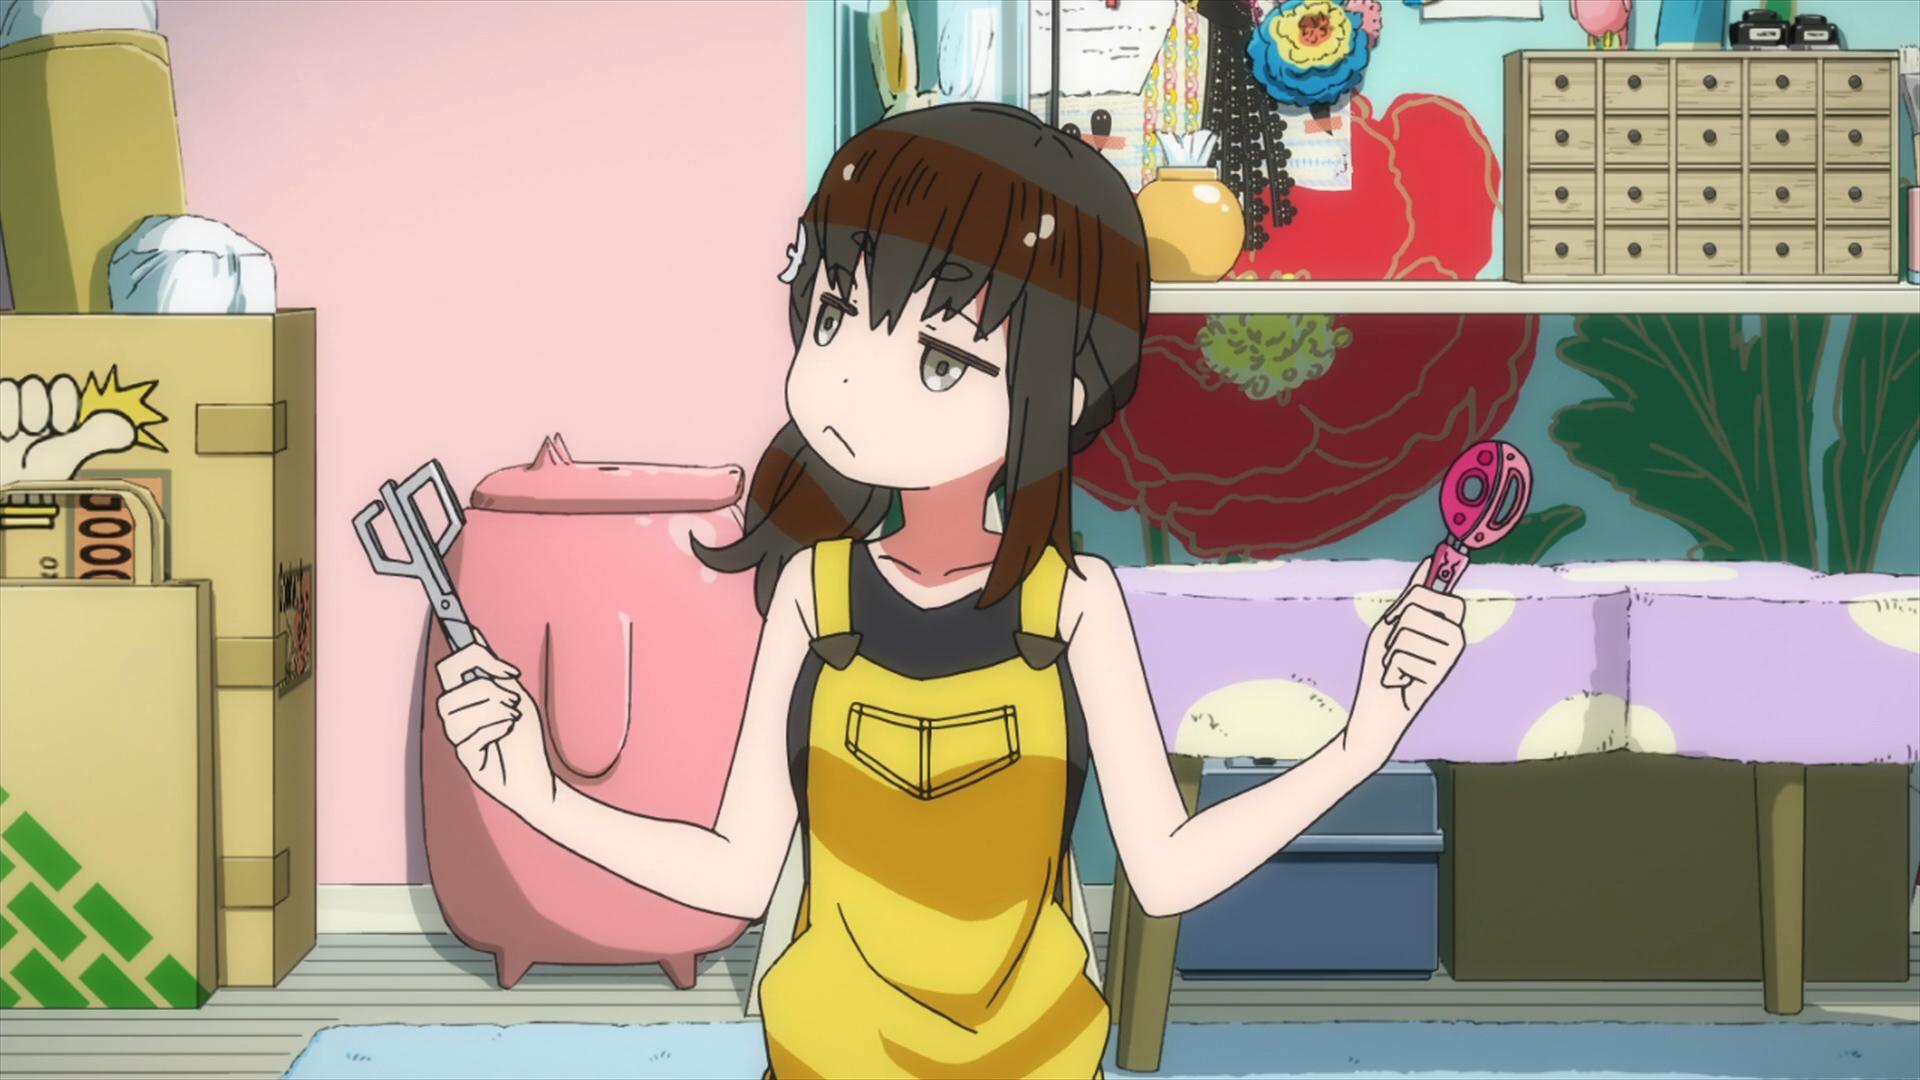 Spoilers] Gatchaman Crowds Episode 7 [Discussion]